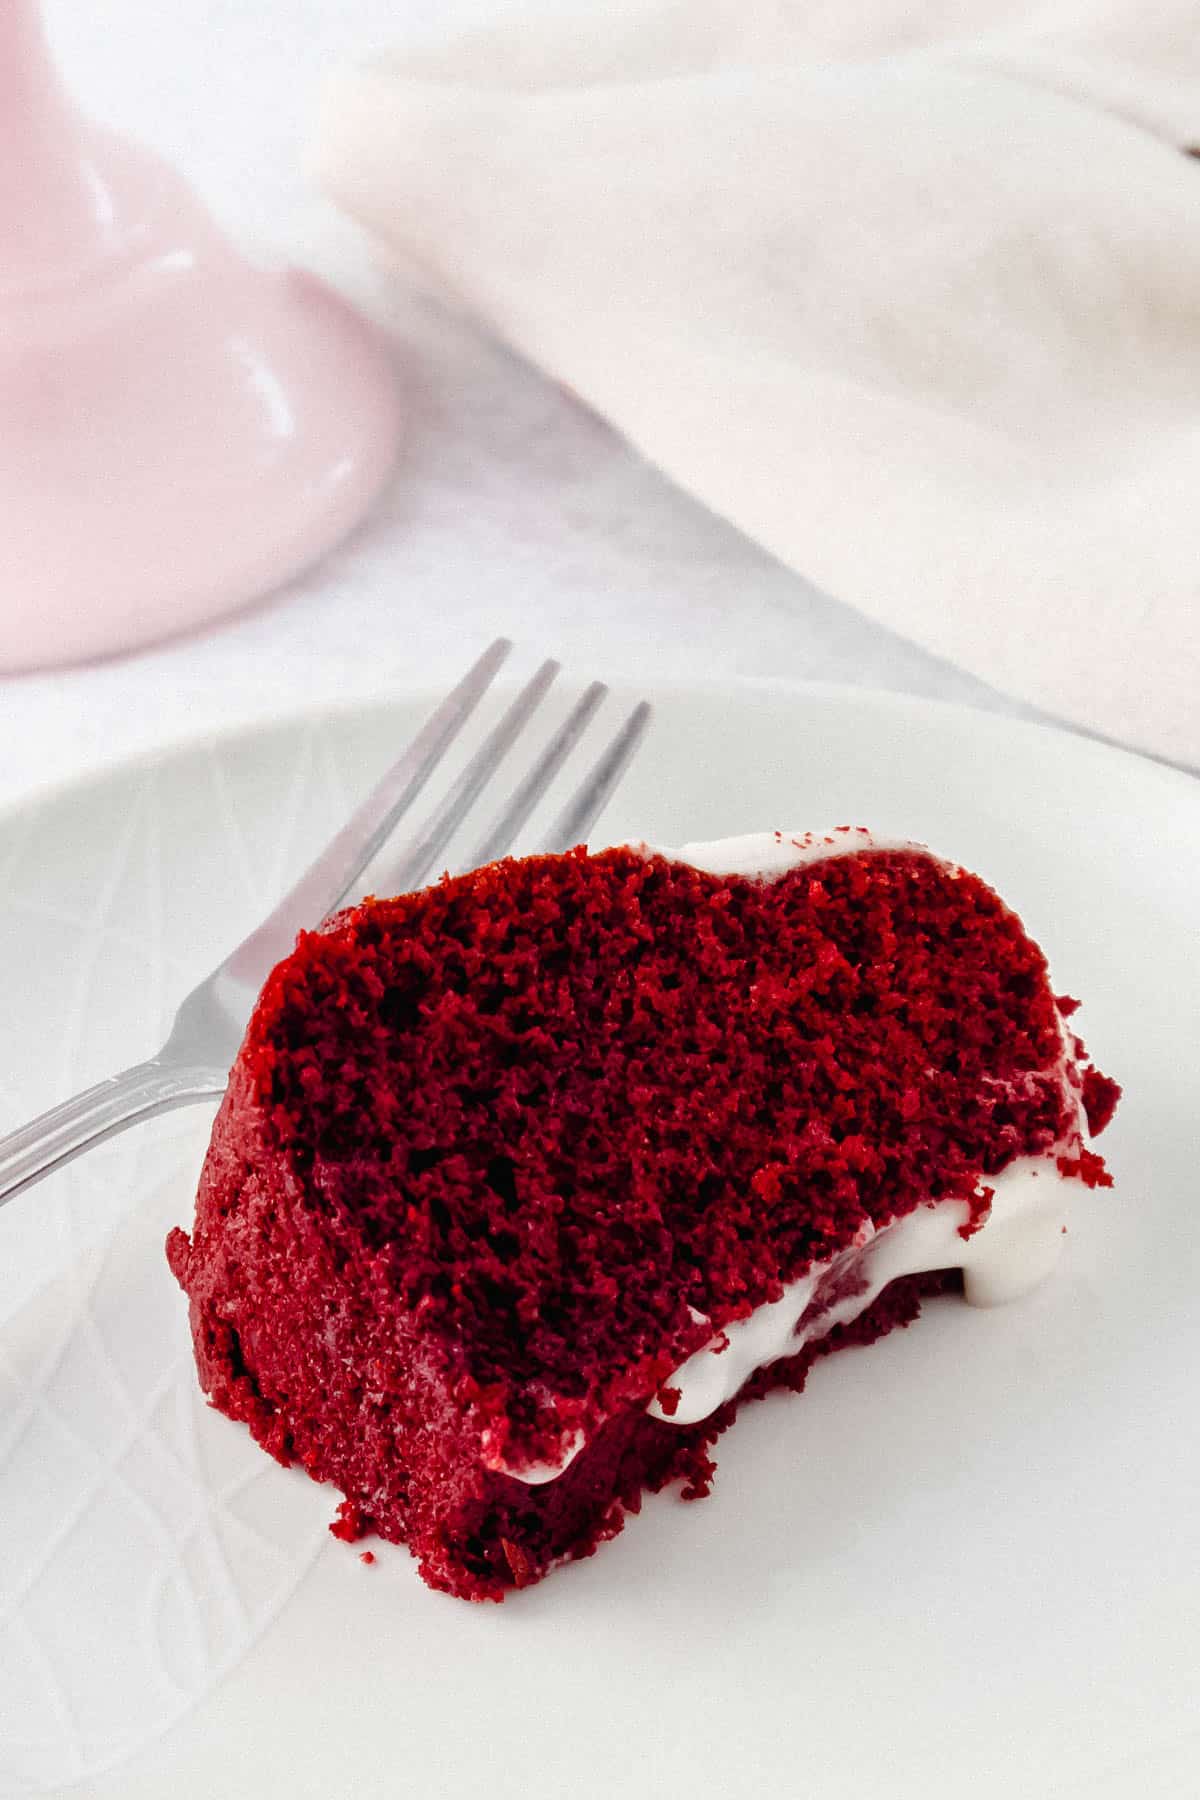 Slice of red coloured cake on a plate with a fork